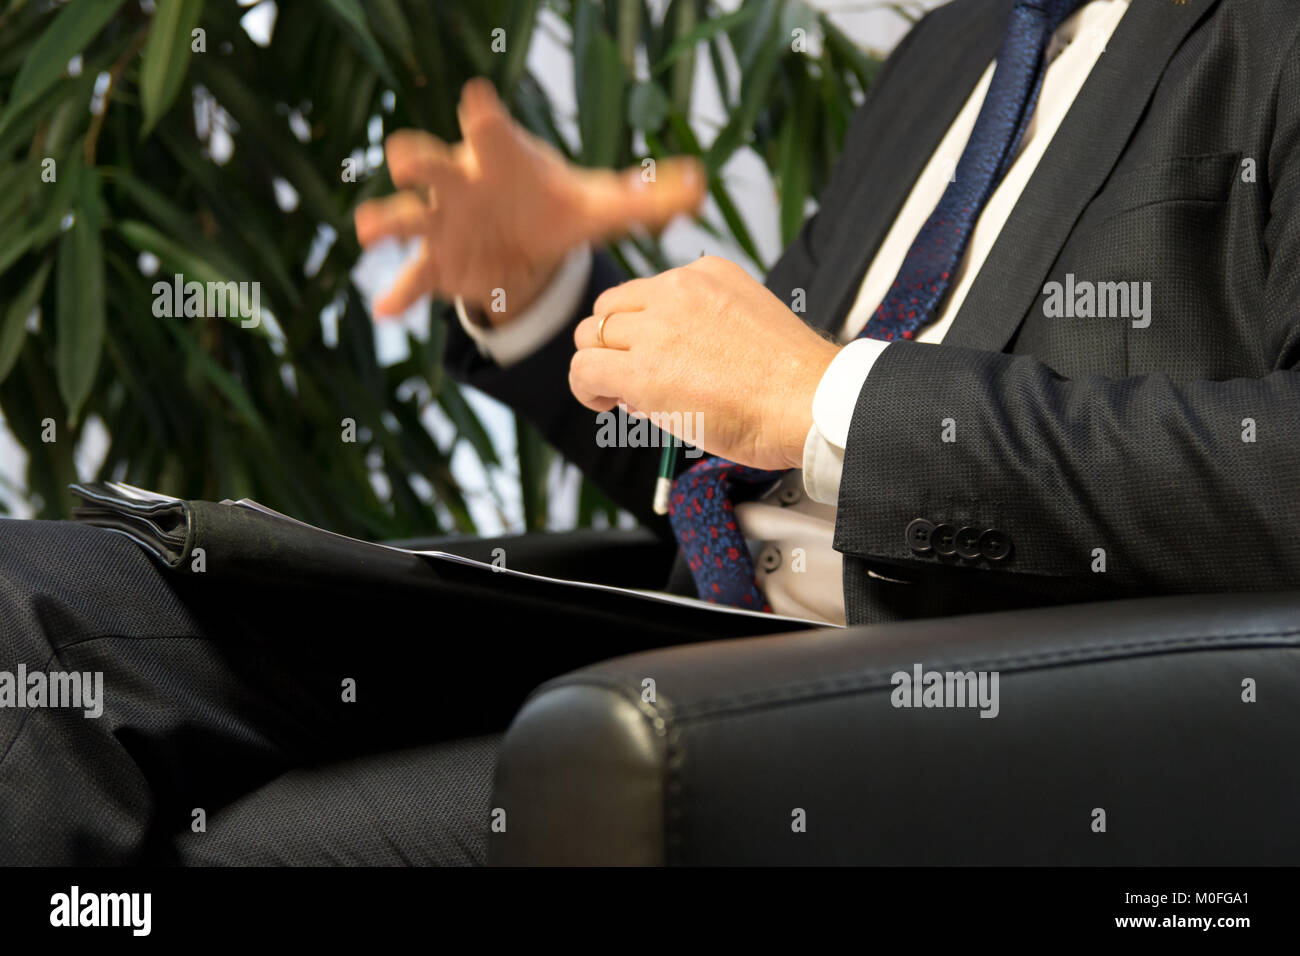 Businessman boss or politician giving interview. Stock Photo